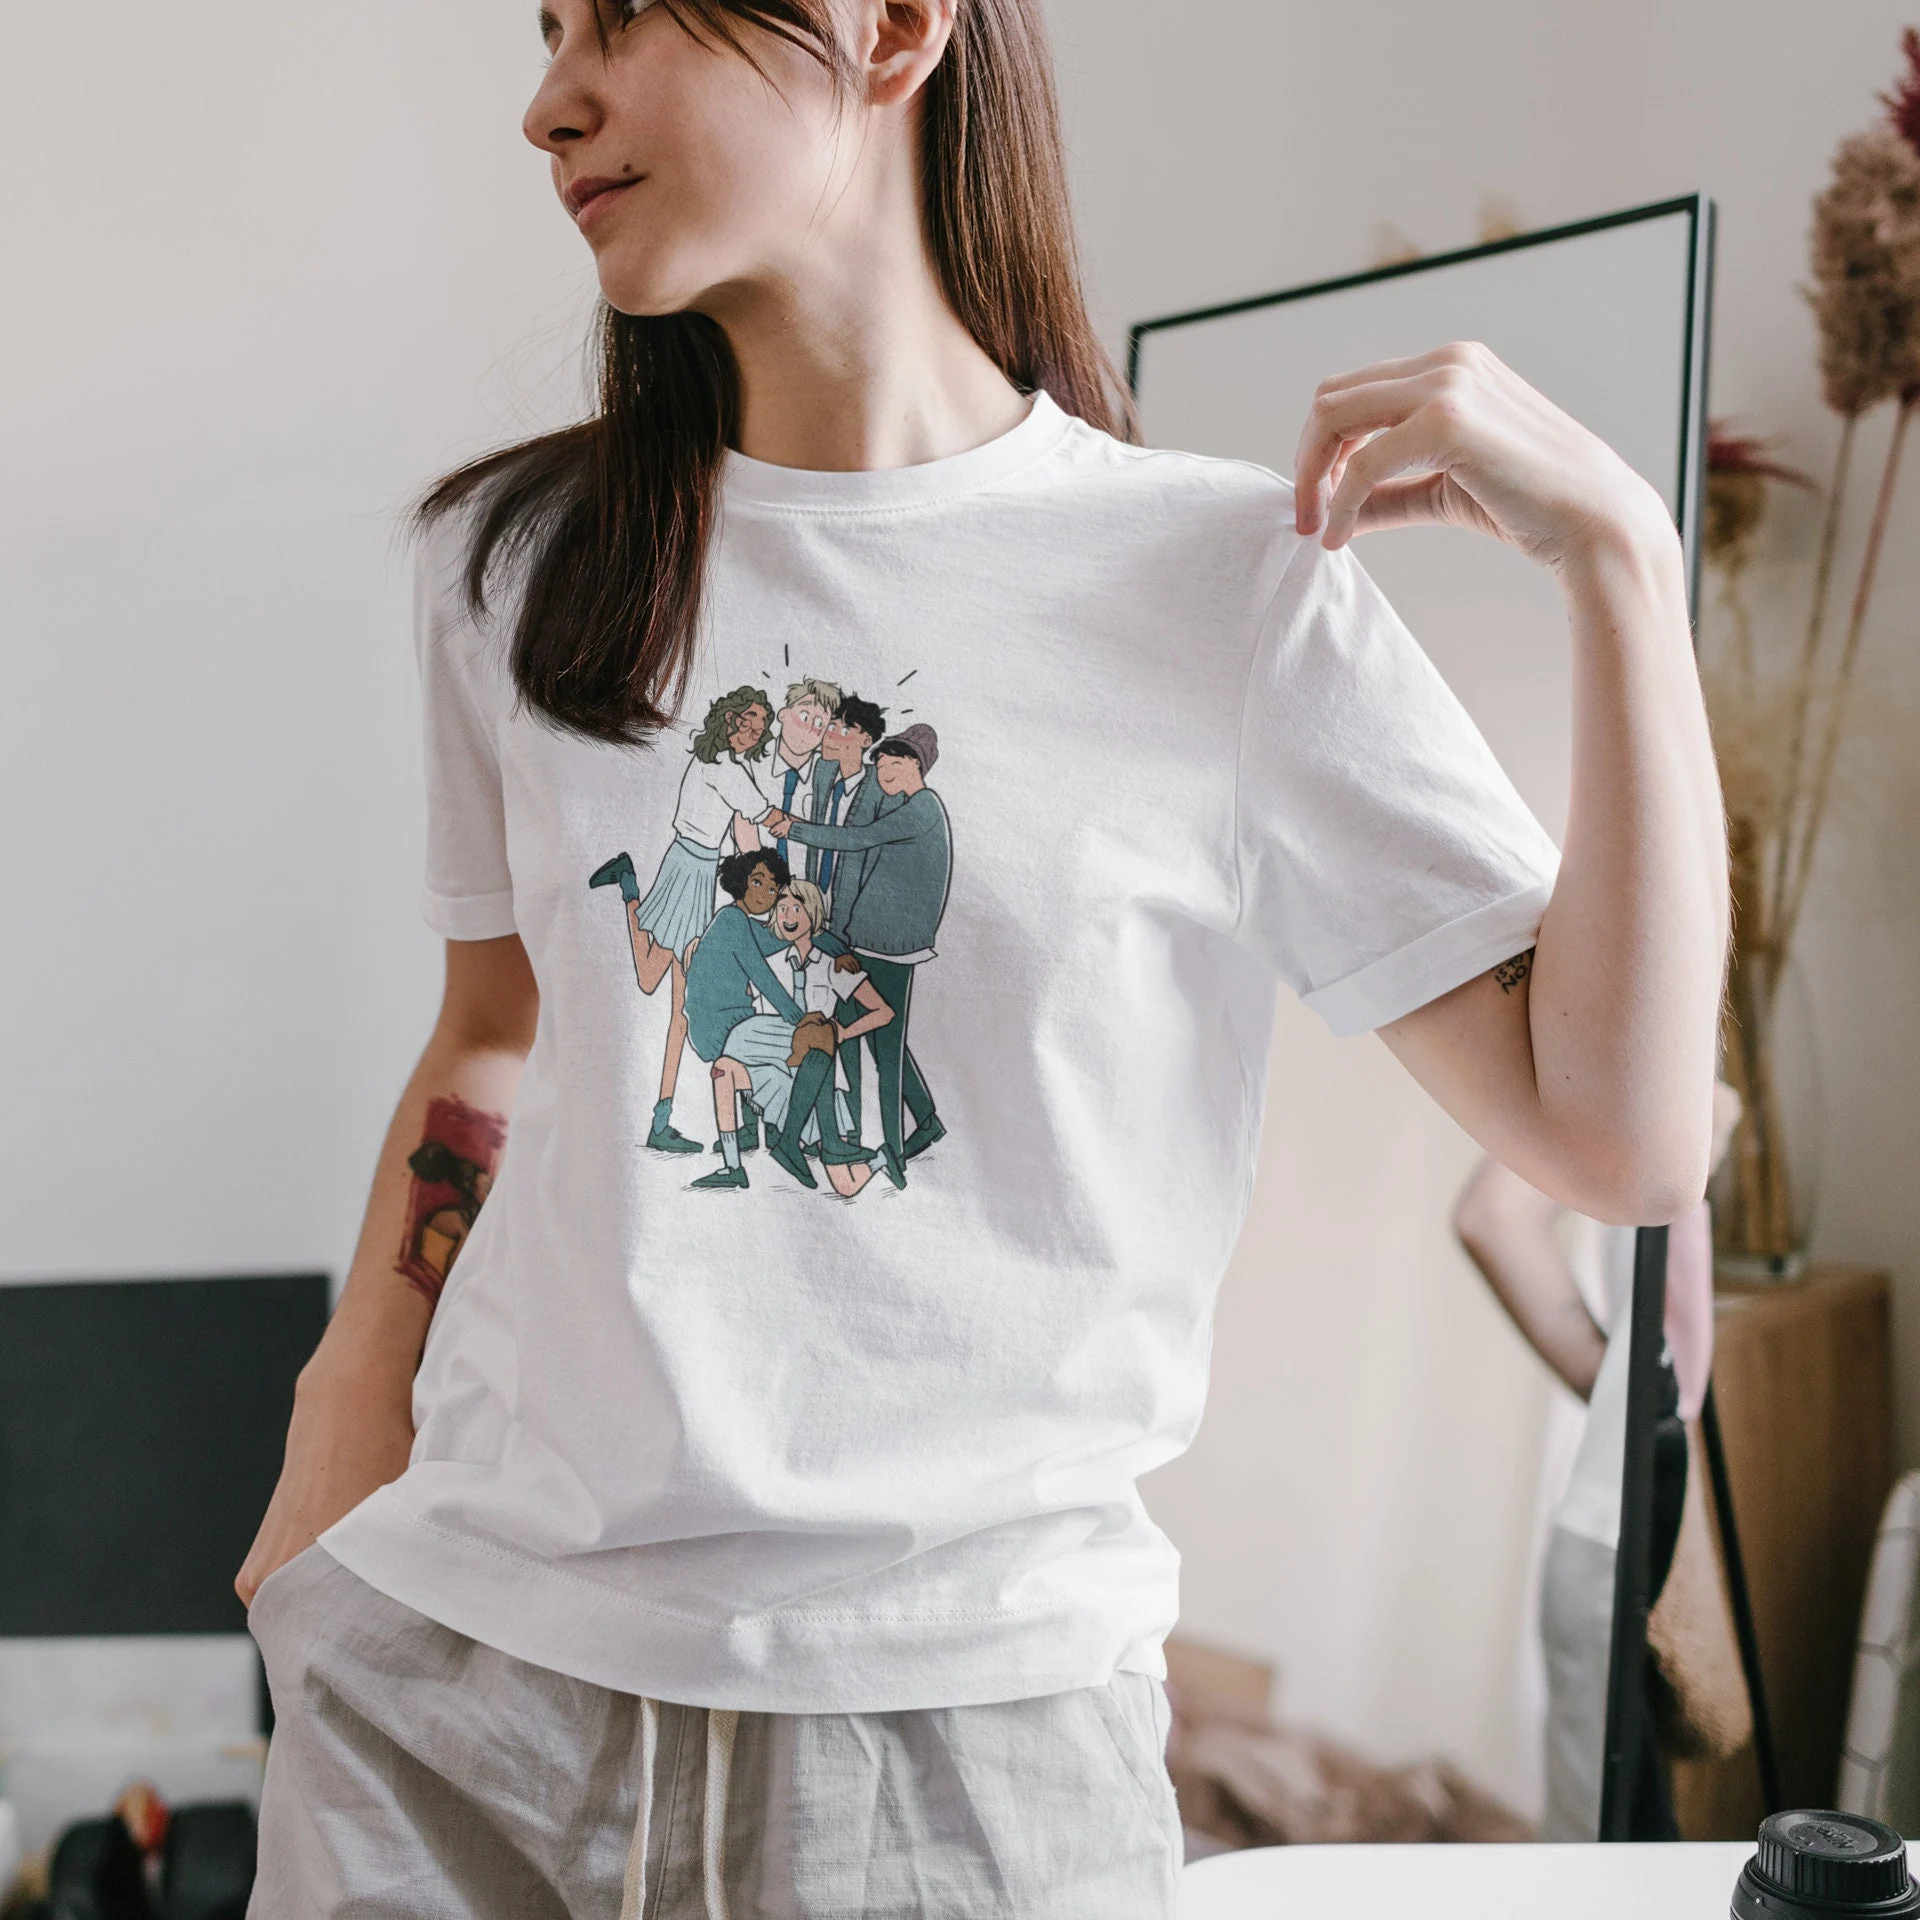 Heartstopper Official Merch: Wear Your Heart on Your Sleeve